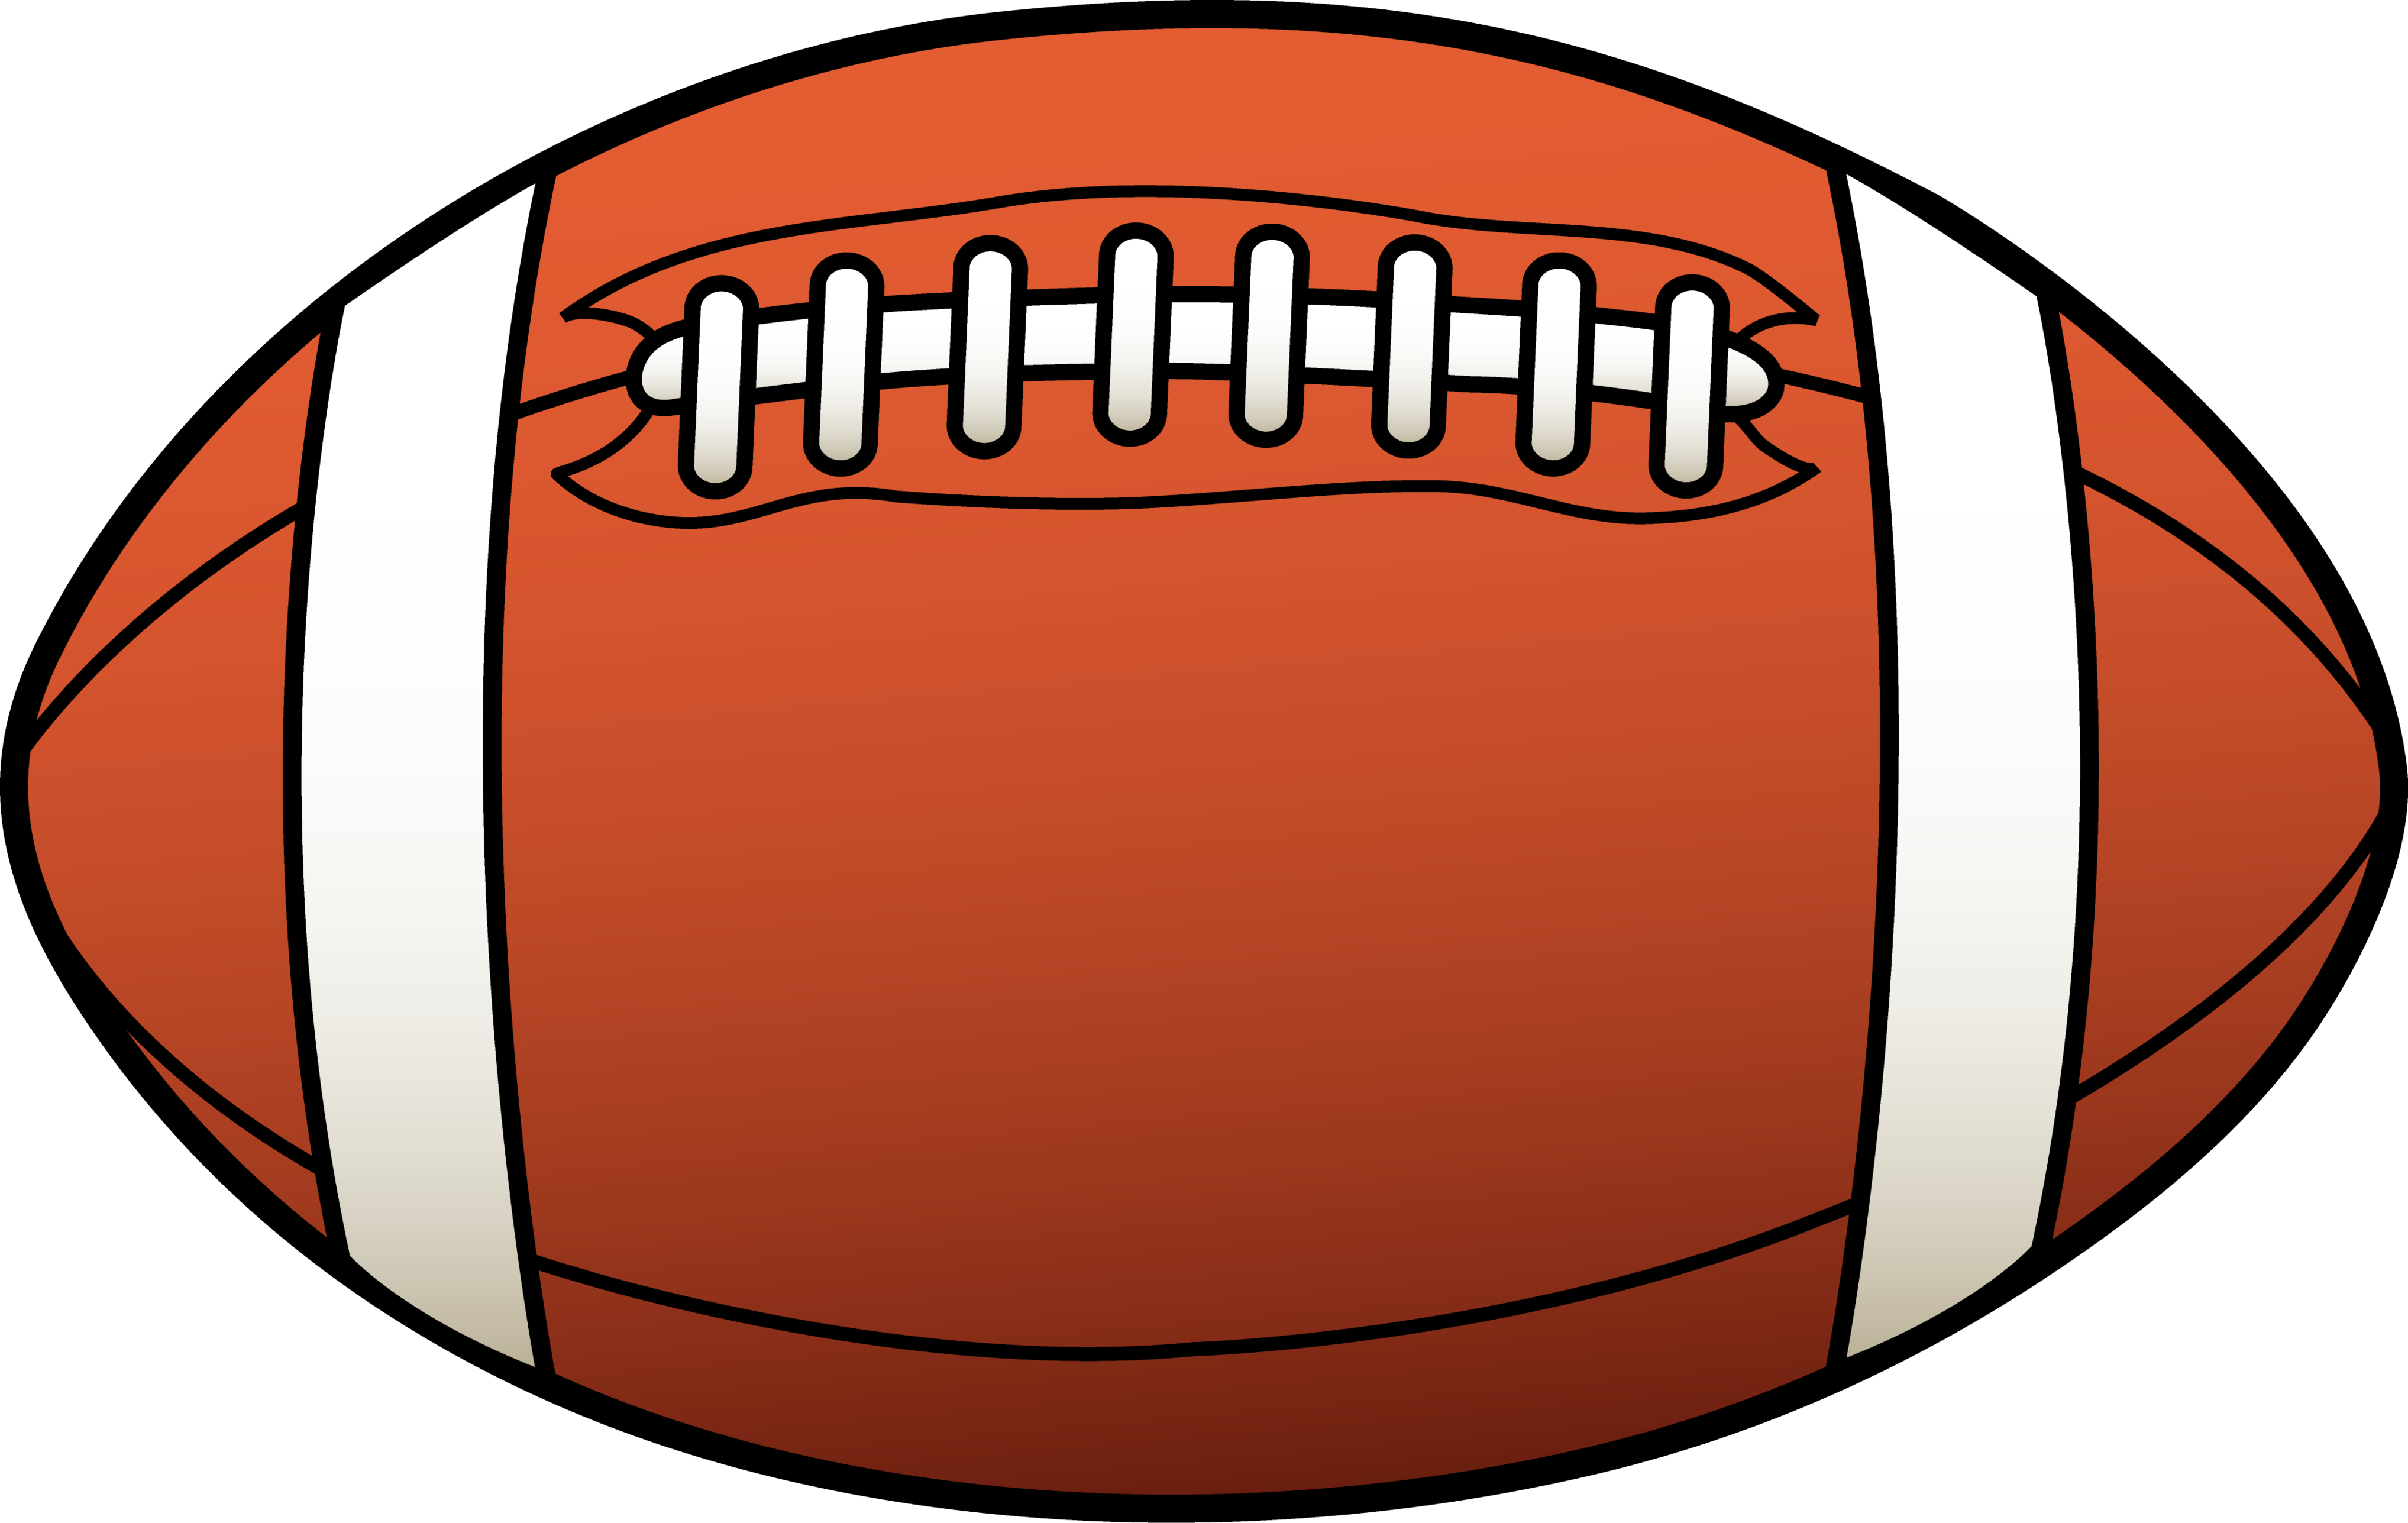 Animated Nfl Ball Clipart - Free to use Clip Art Resource